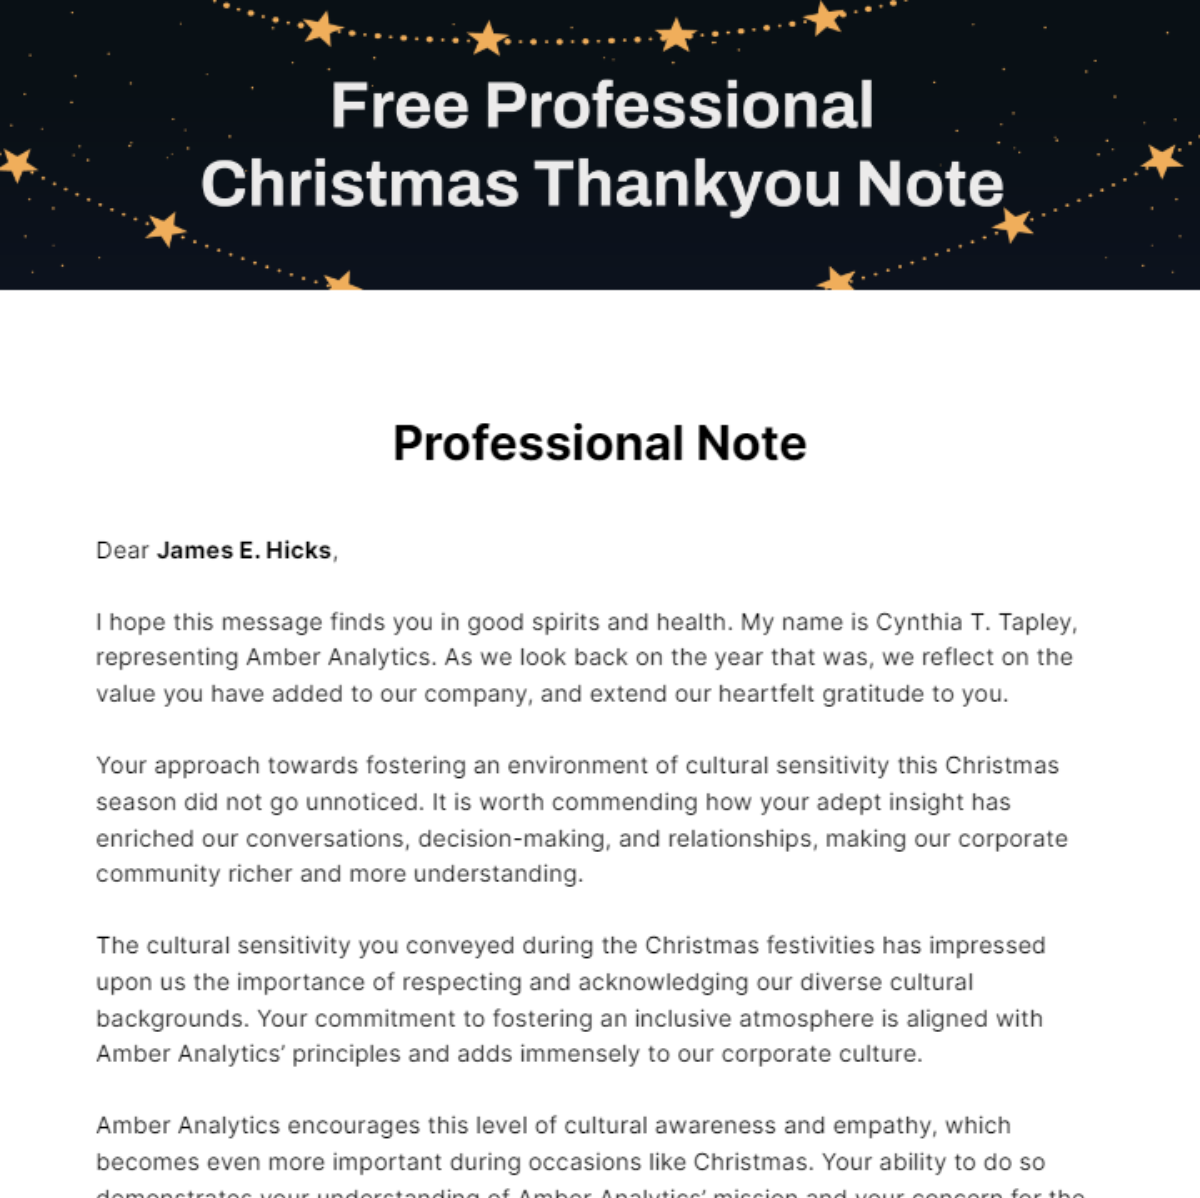 Free Professional Christmas Thankyou Note Template